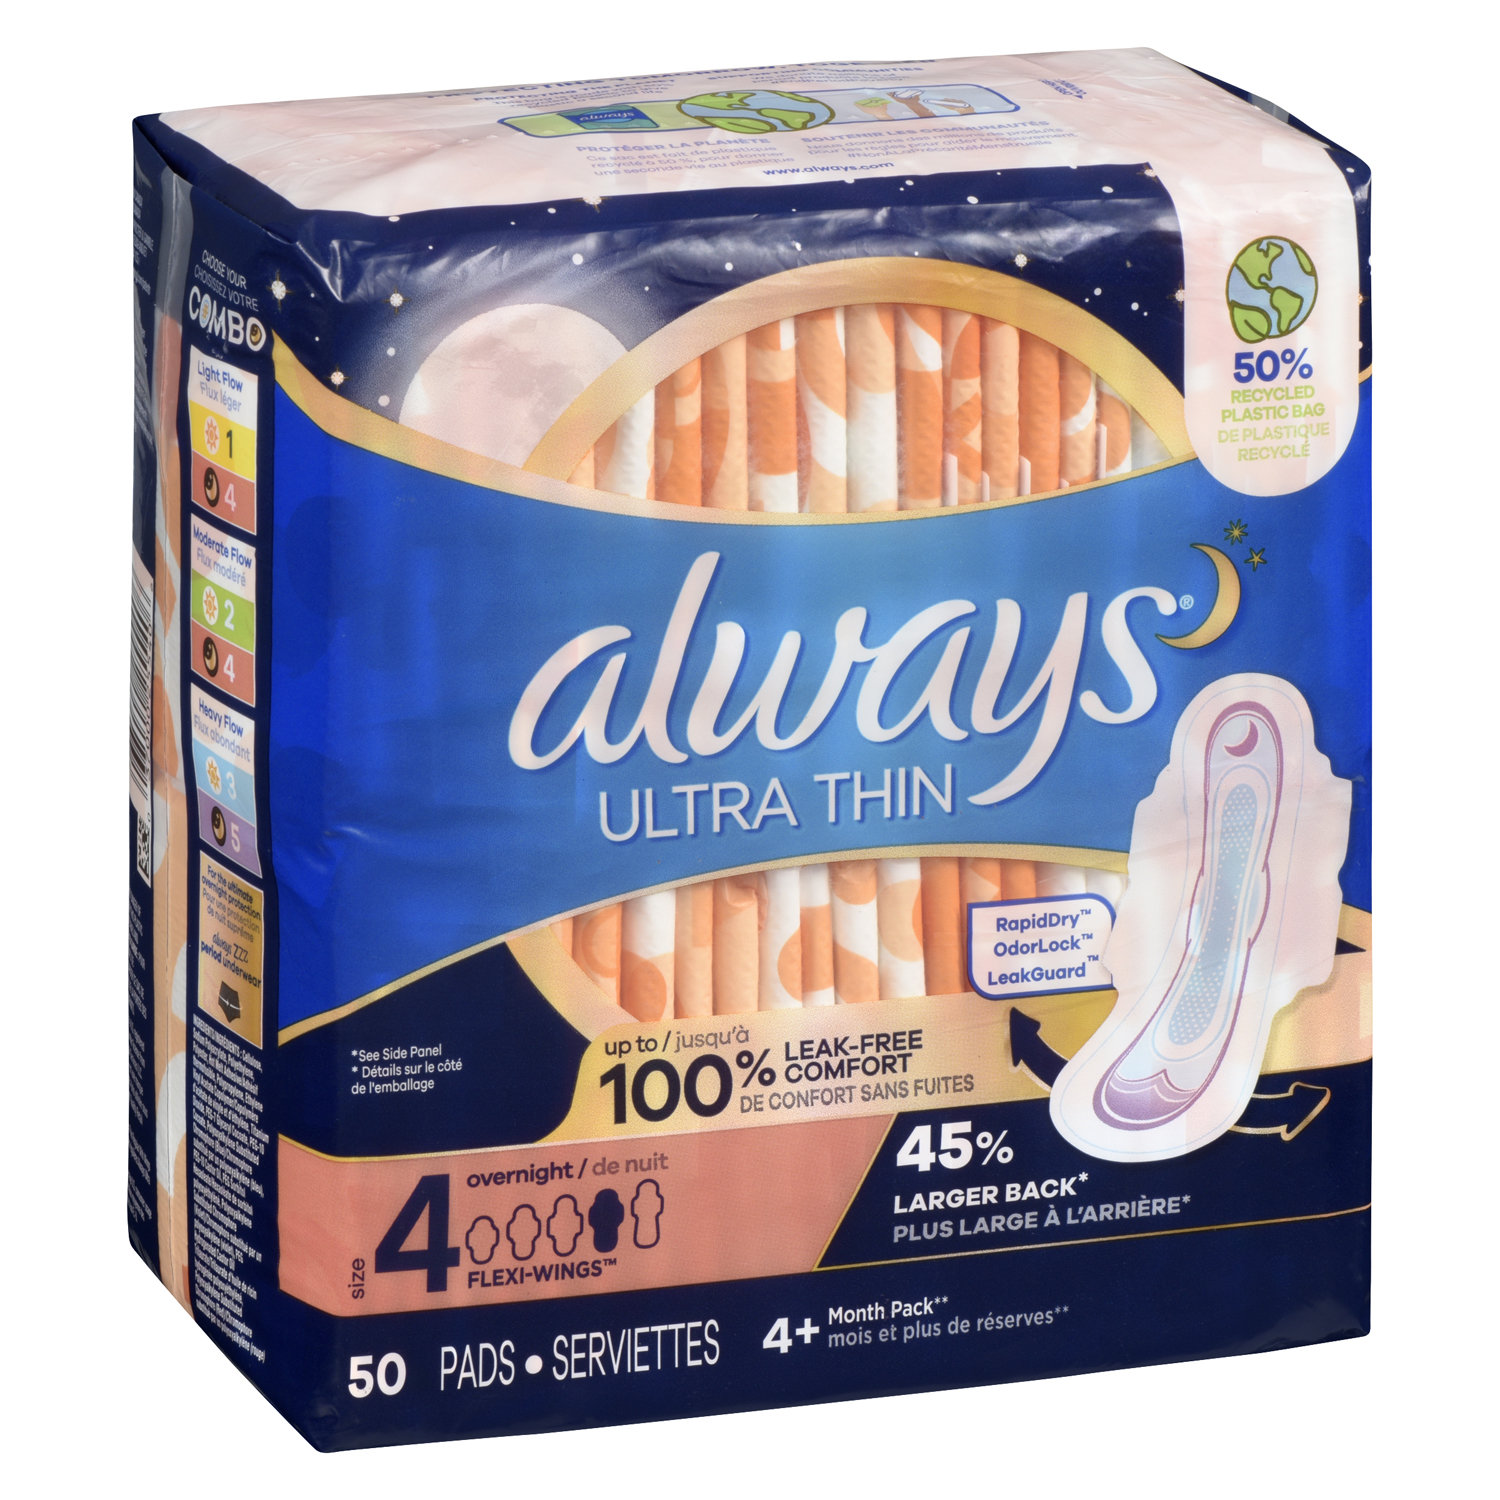 Feminine Care, Pads, Regular - Ultra Thin, 18 pads at Whole Foods Market